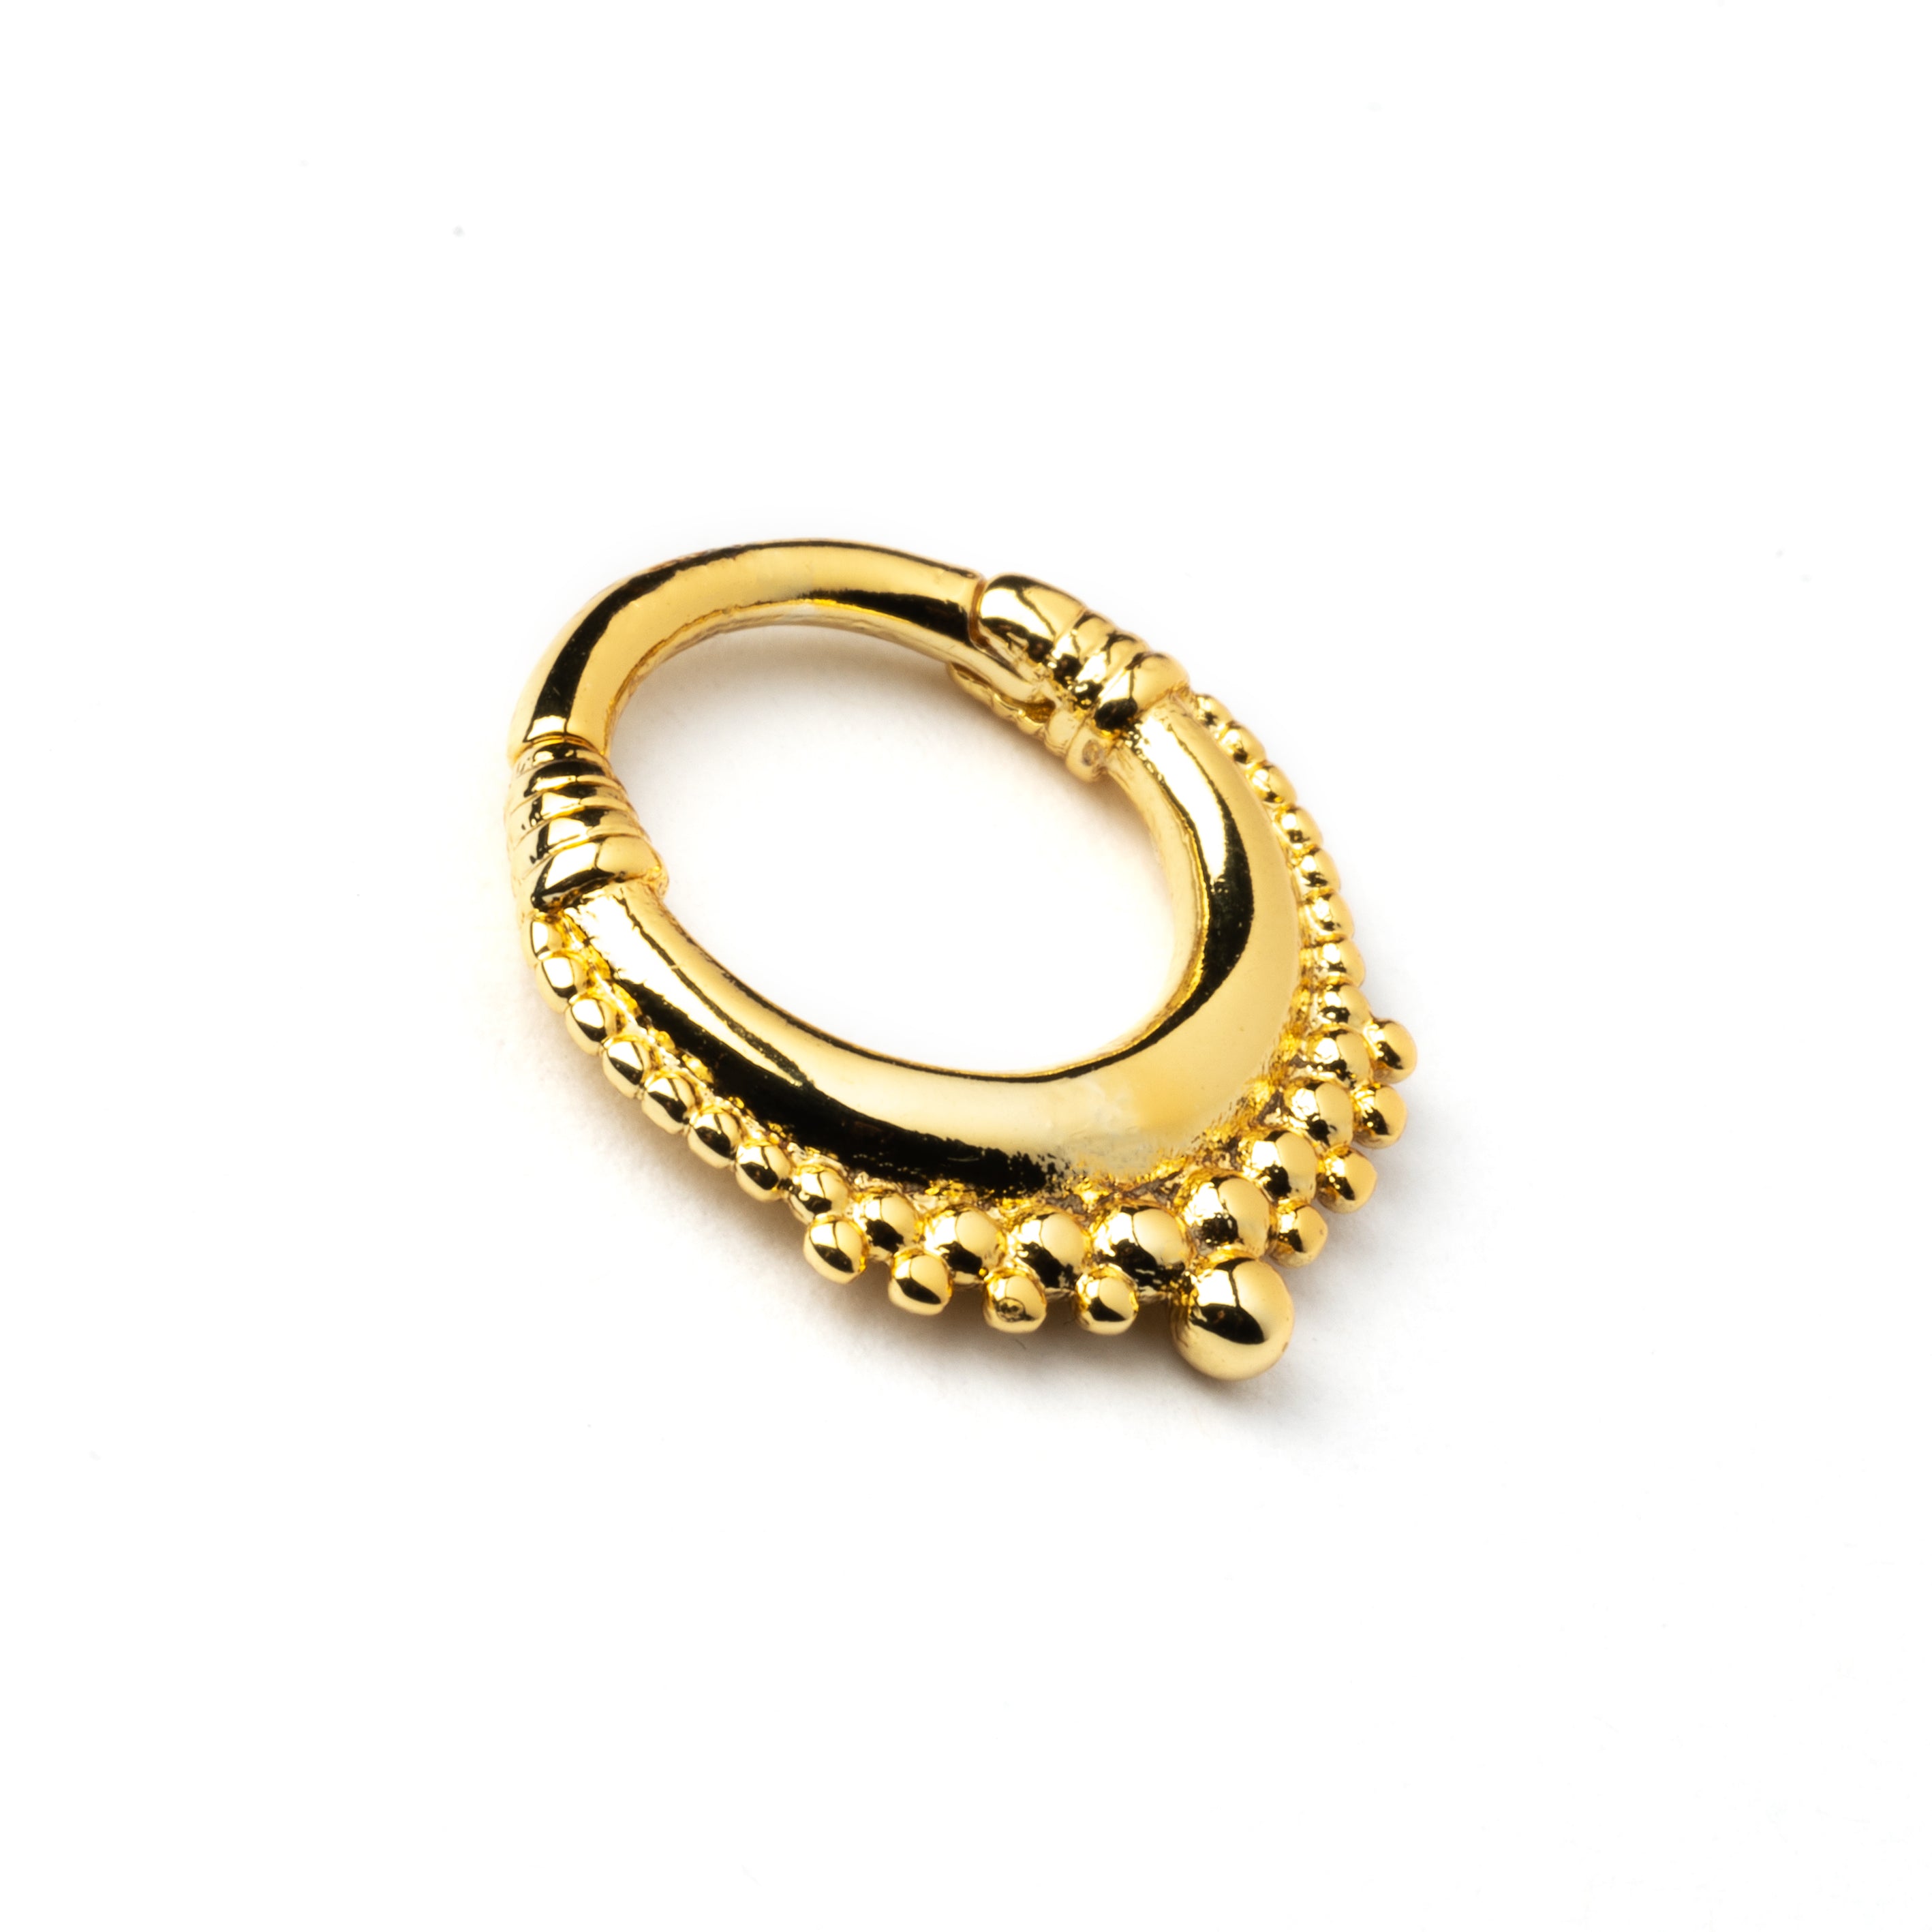 Gold Meena septum clicker right side view